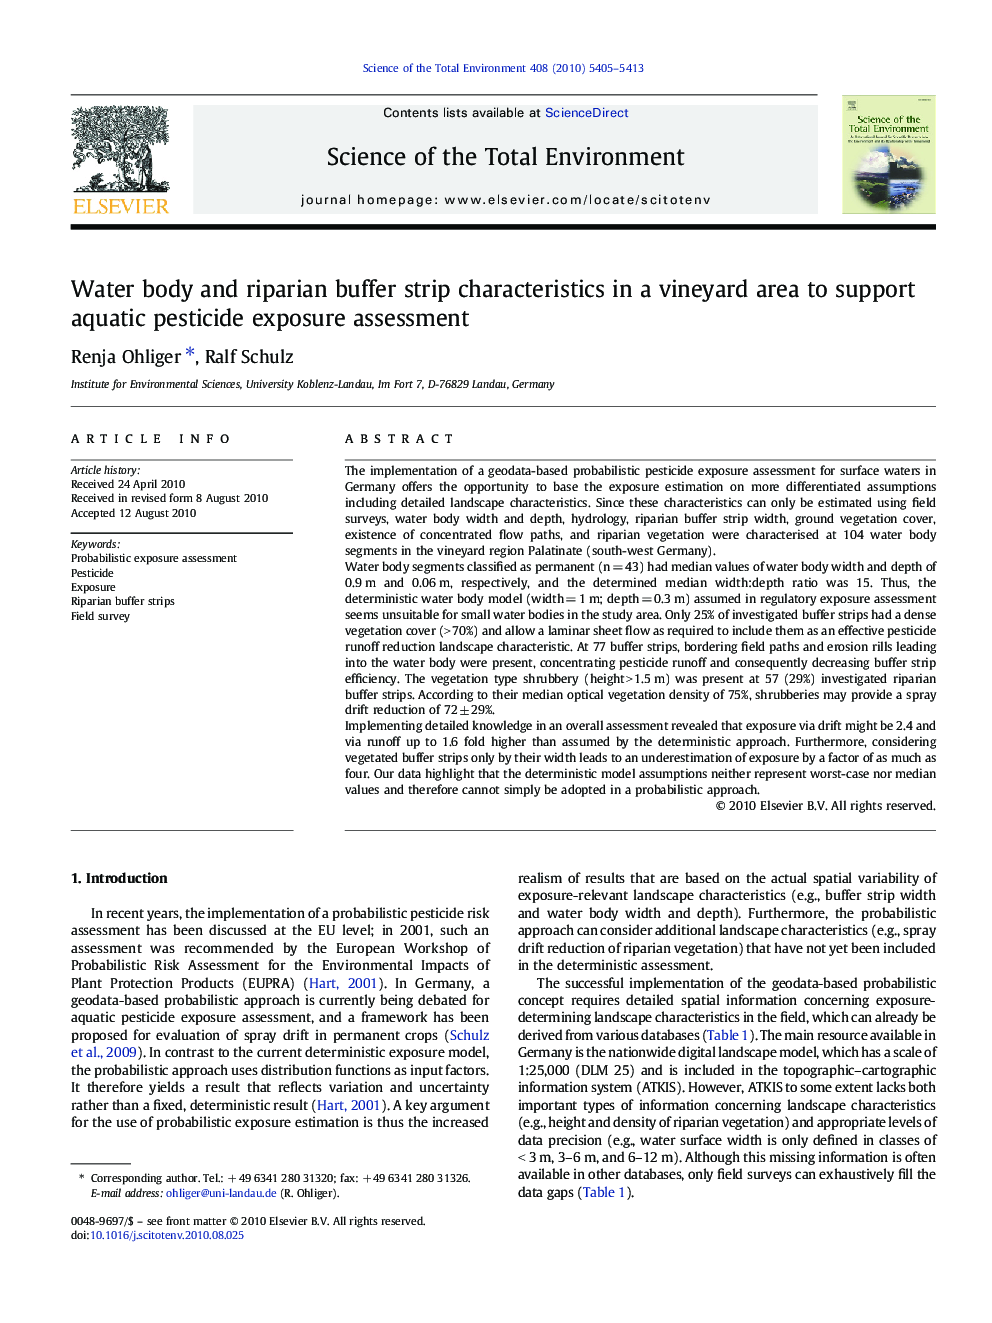 Water body and riparian buffer strip characteristics in a vineyard area to support aquatic pesticide exposure assessment